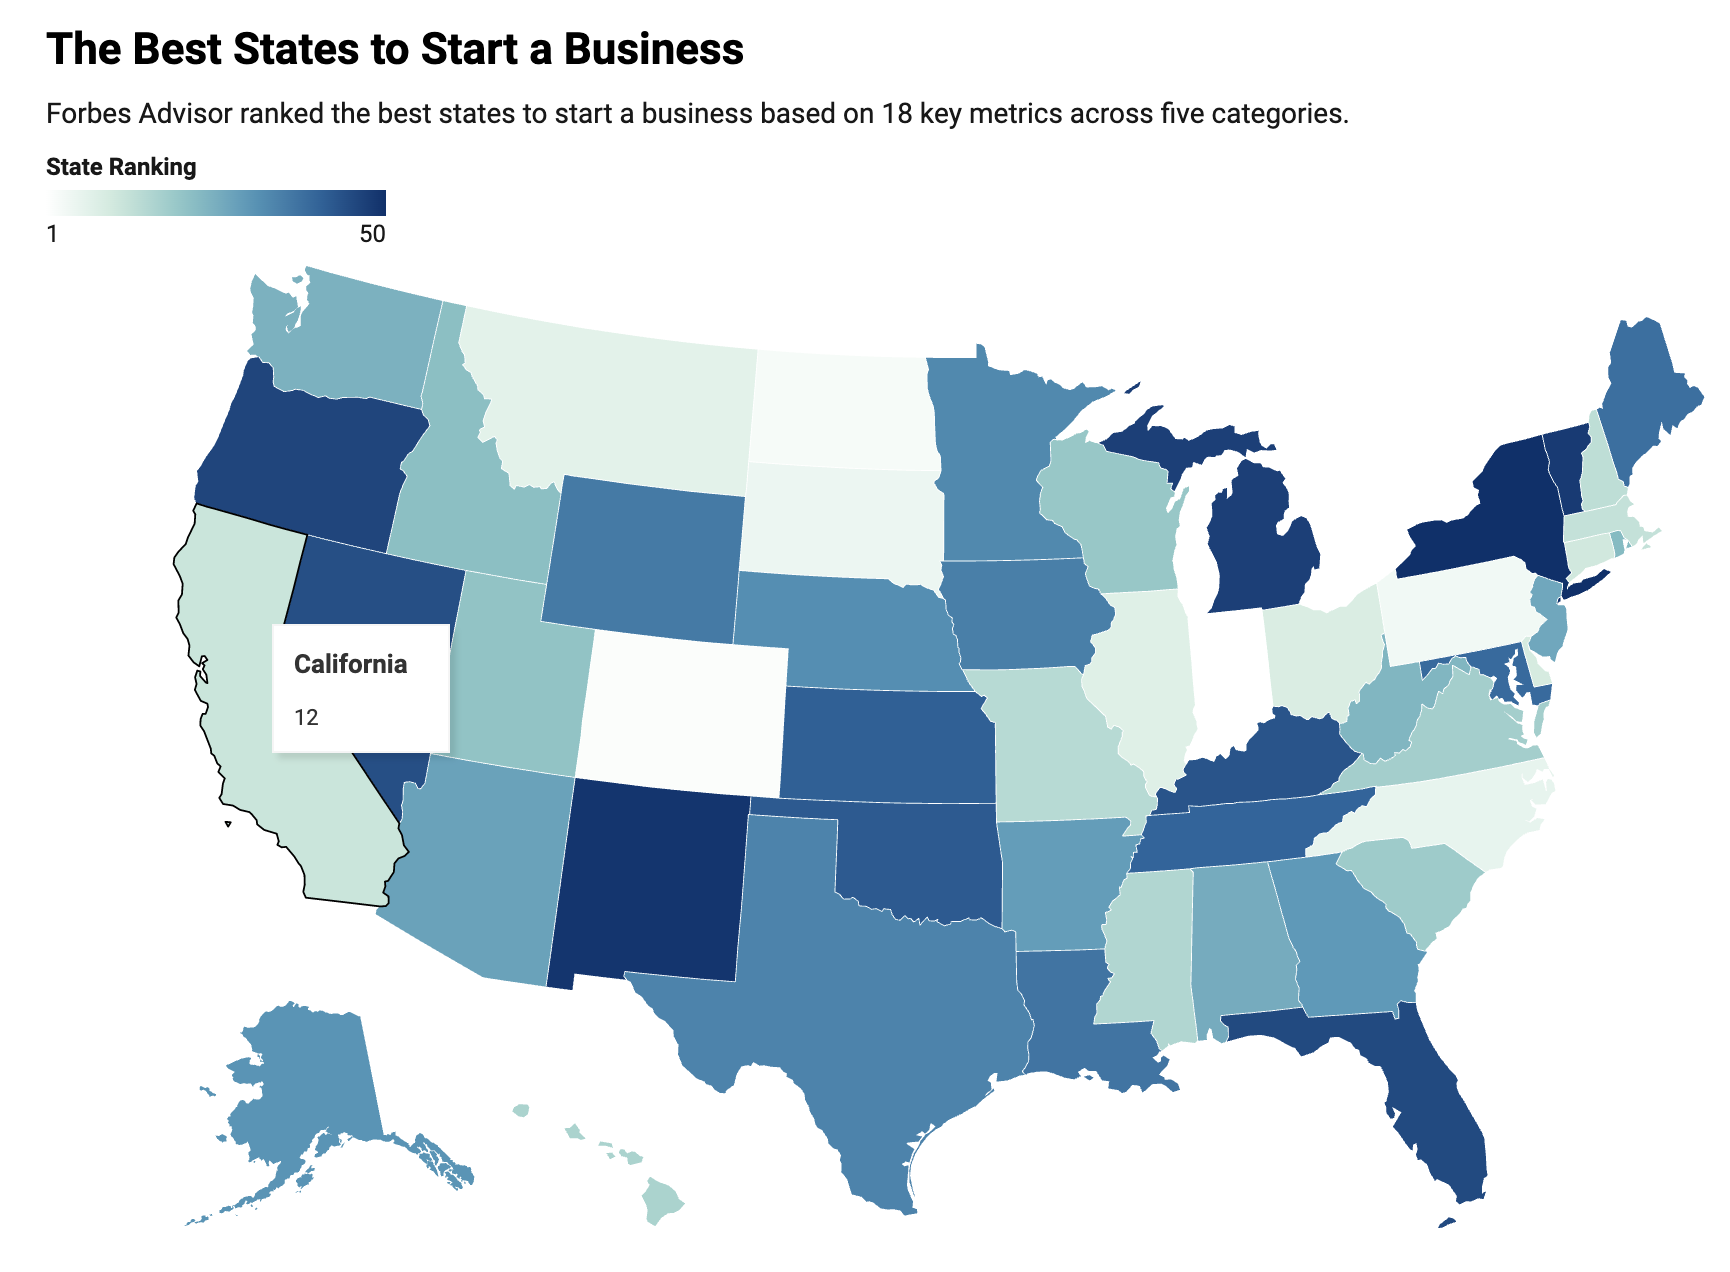 best states to start a business california rank 12